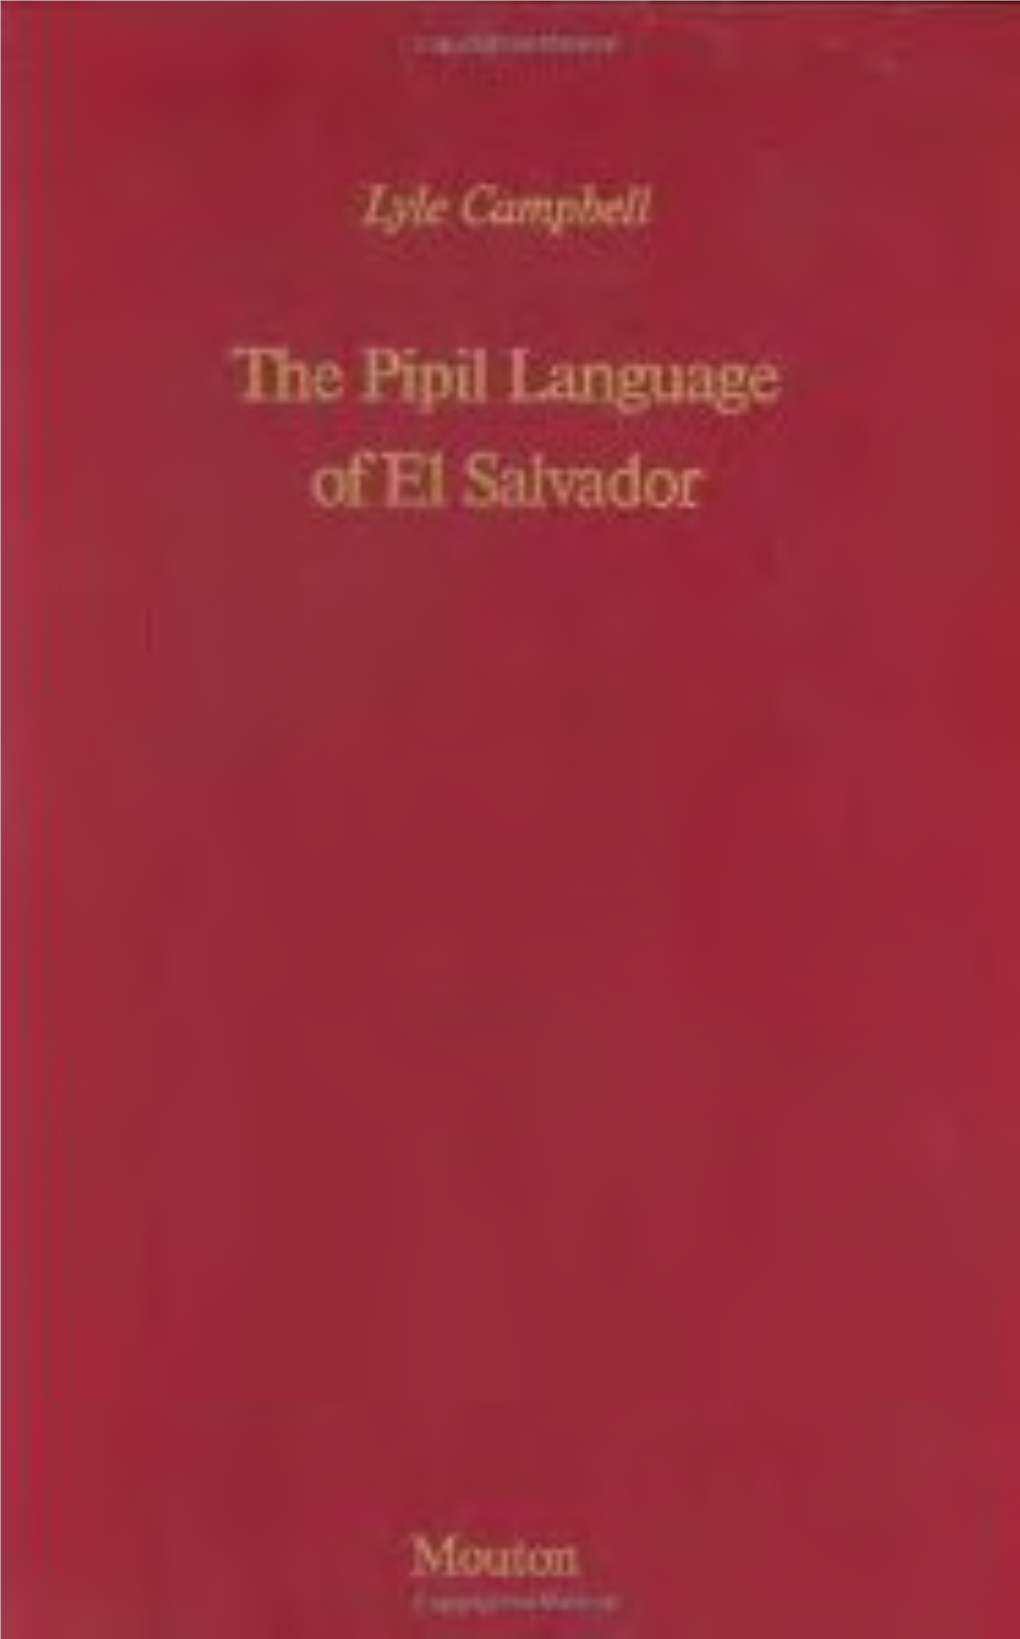 Lyle Campbell the Pipil Language of El Salvador Library of Congress Cataloging in Publication Data Campbell, Lyle